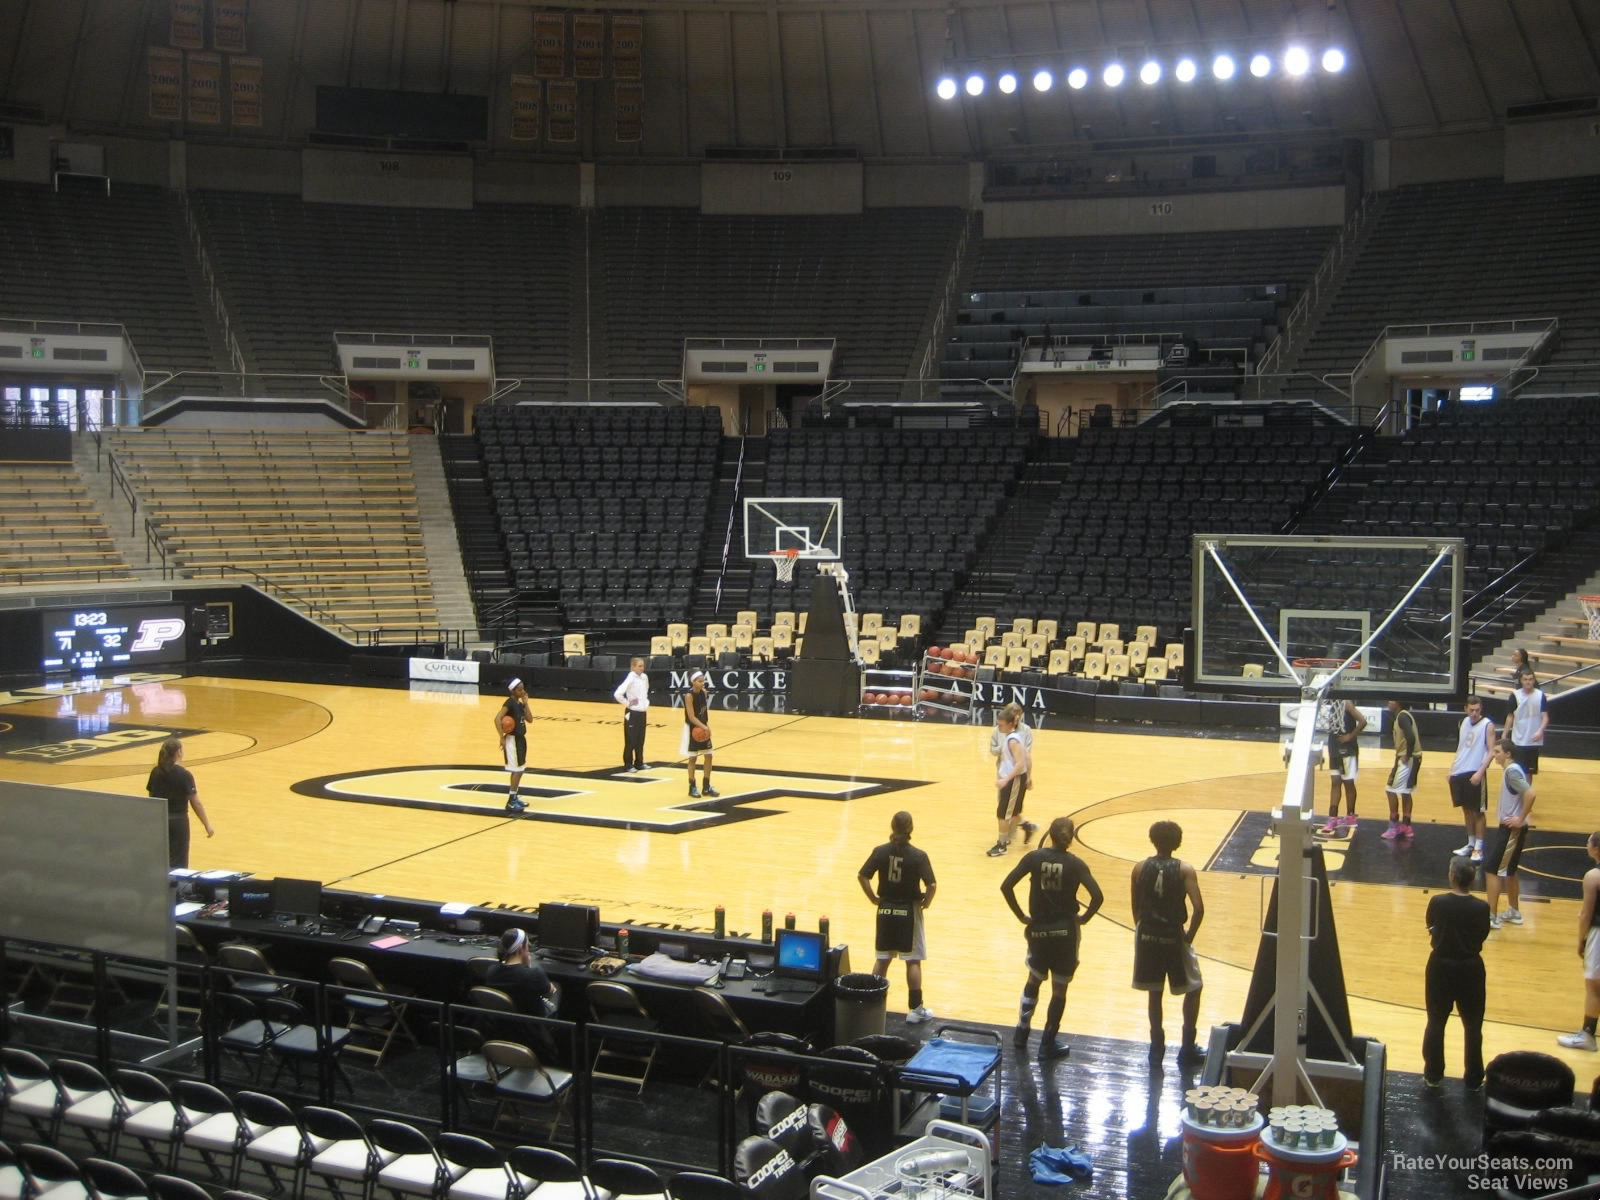 section 17, row 10 seat view  - mackey arena